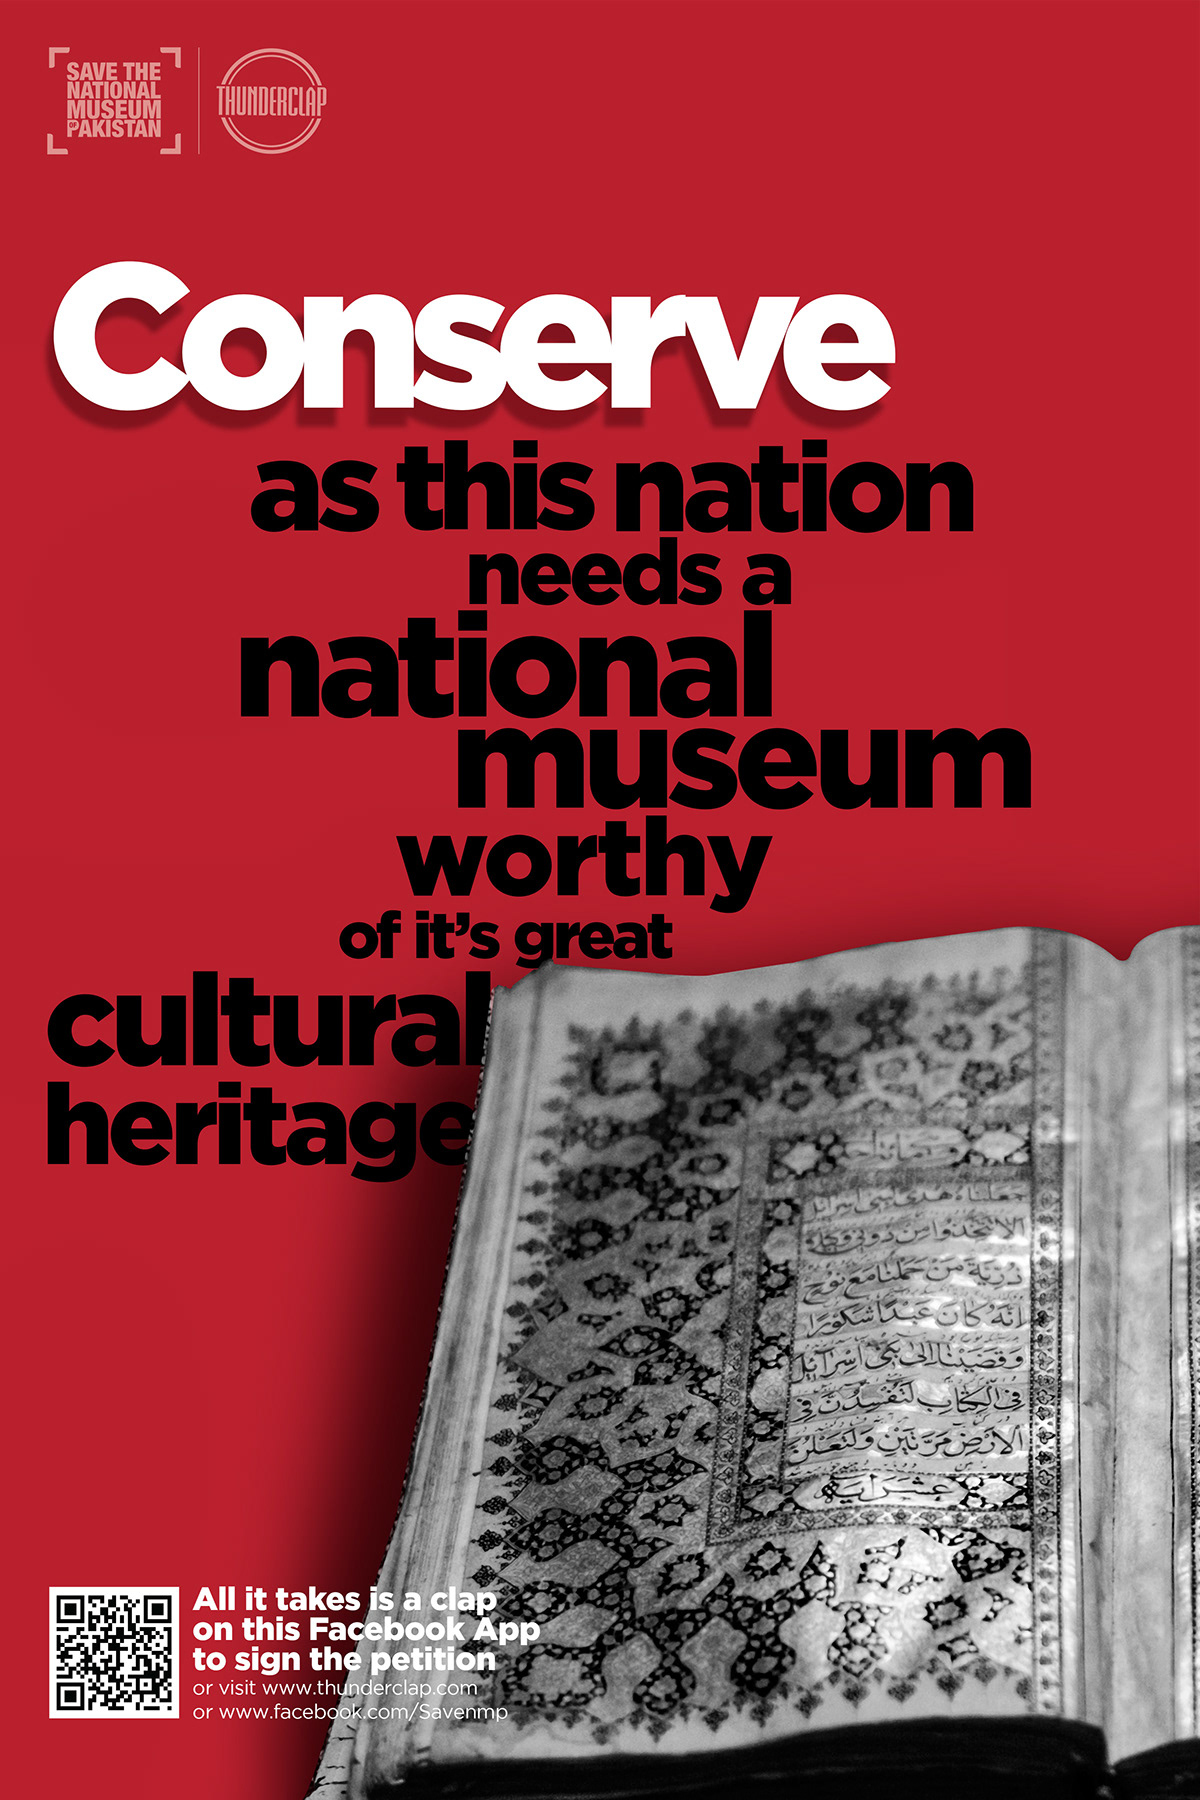 save national museum pakista poster petition campaign Direct mail red sculptures heritage culture Preserve Conserve thesis